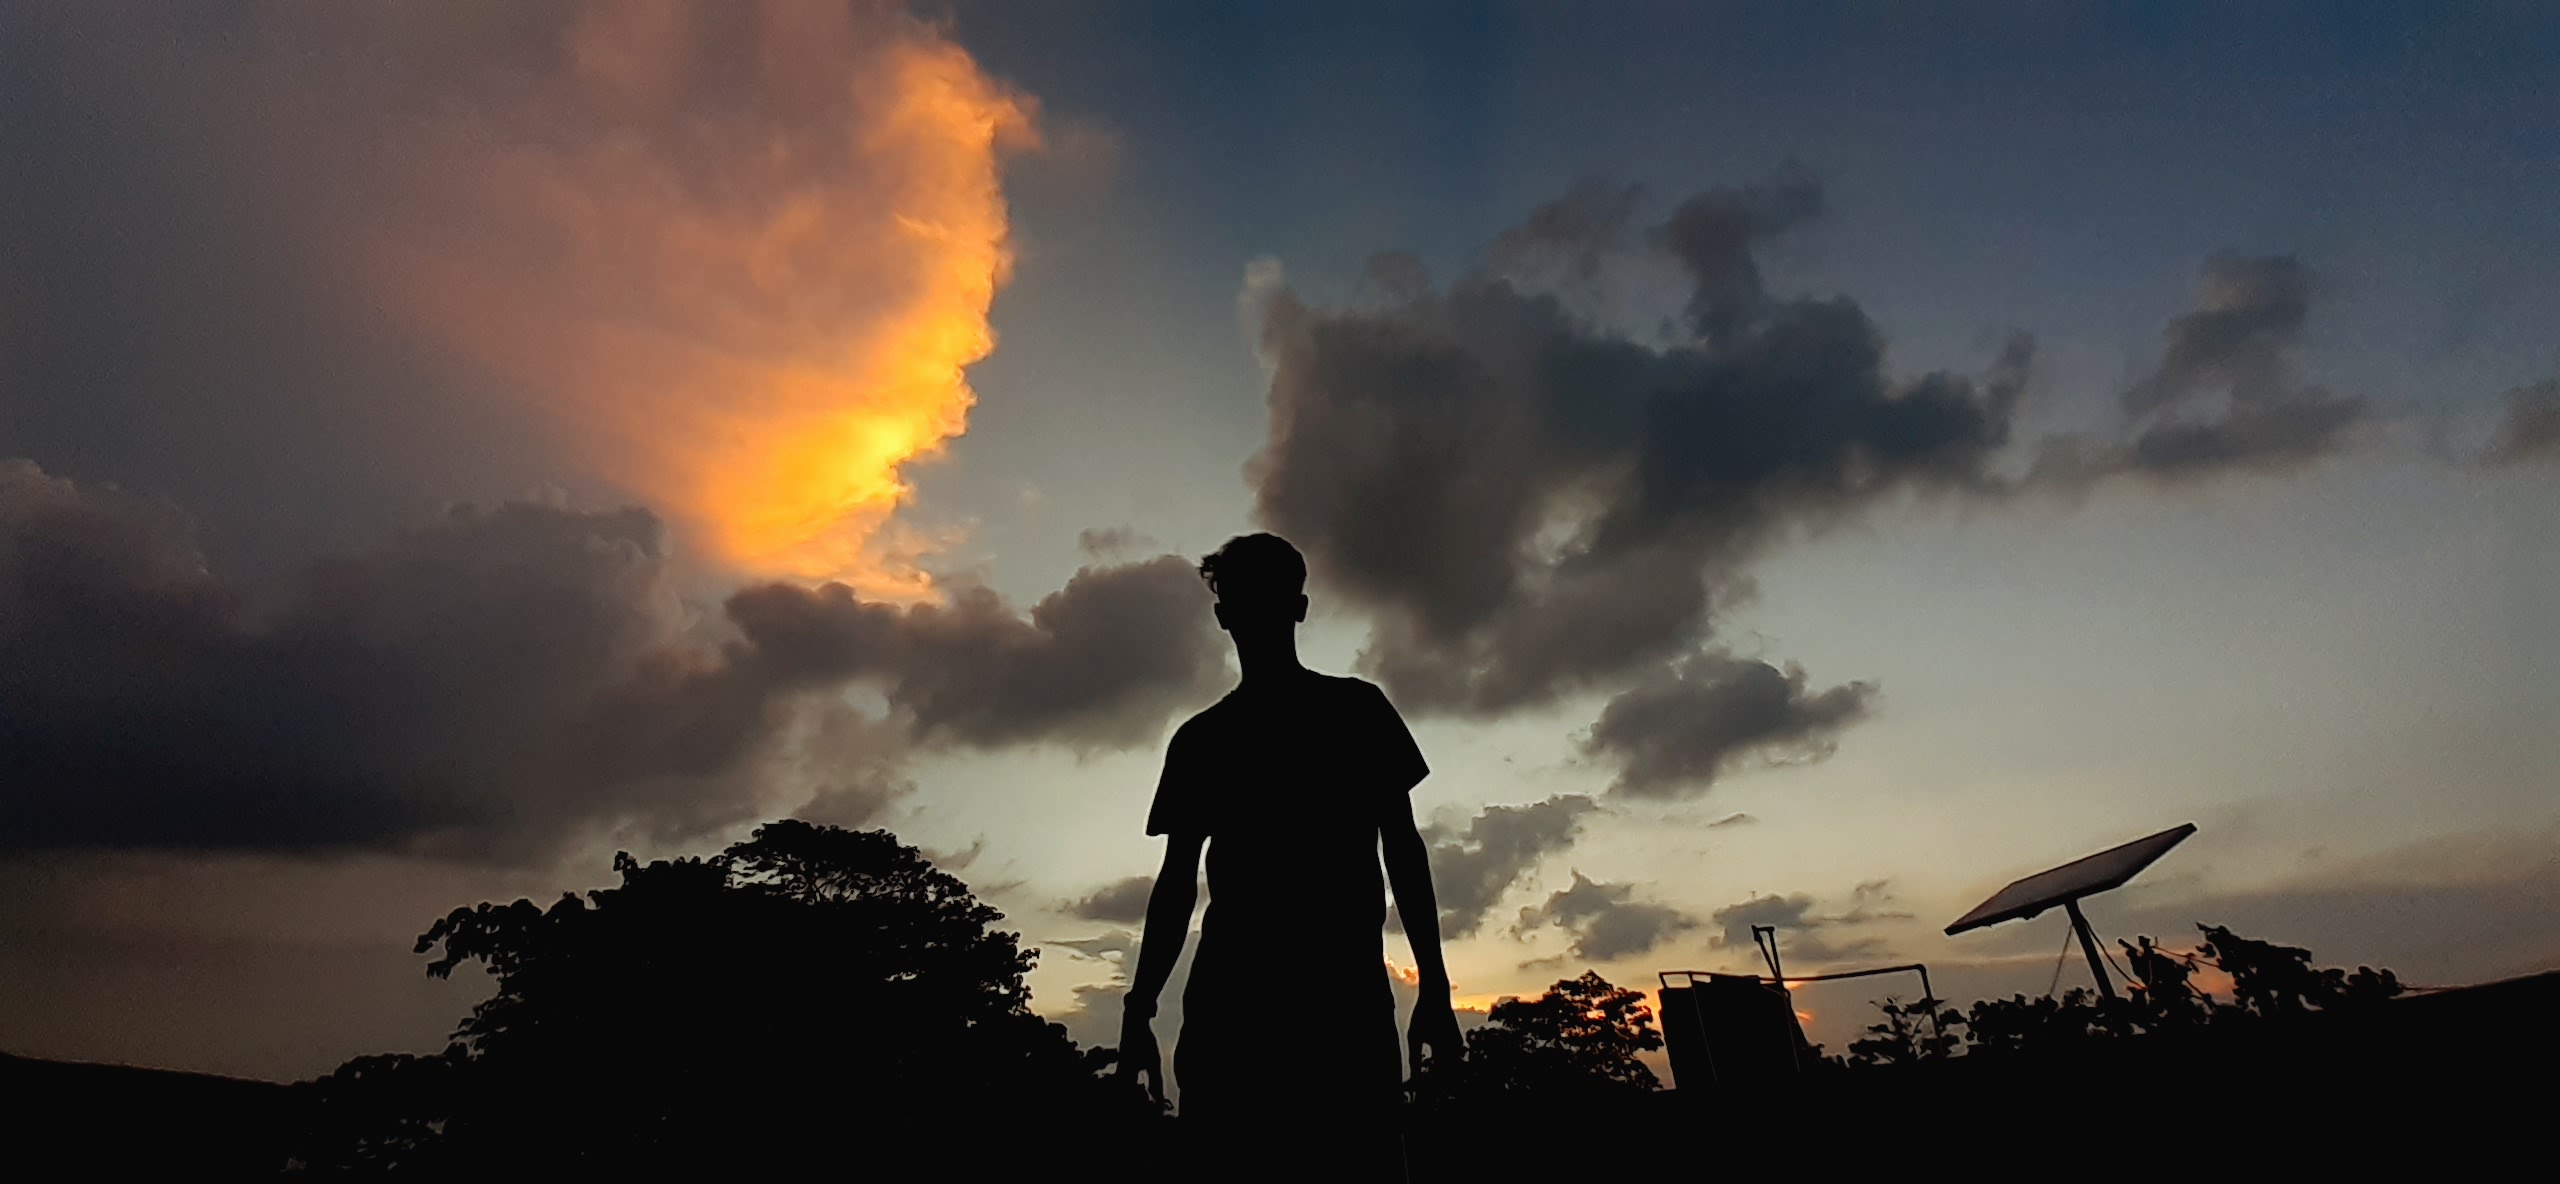 A boy enjoying sunset clouds - Free Image by Lensational on PixaHive.com